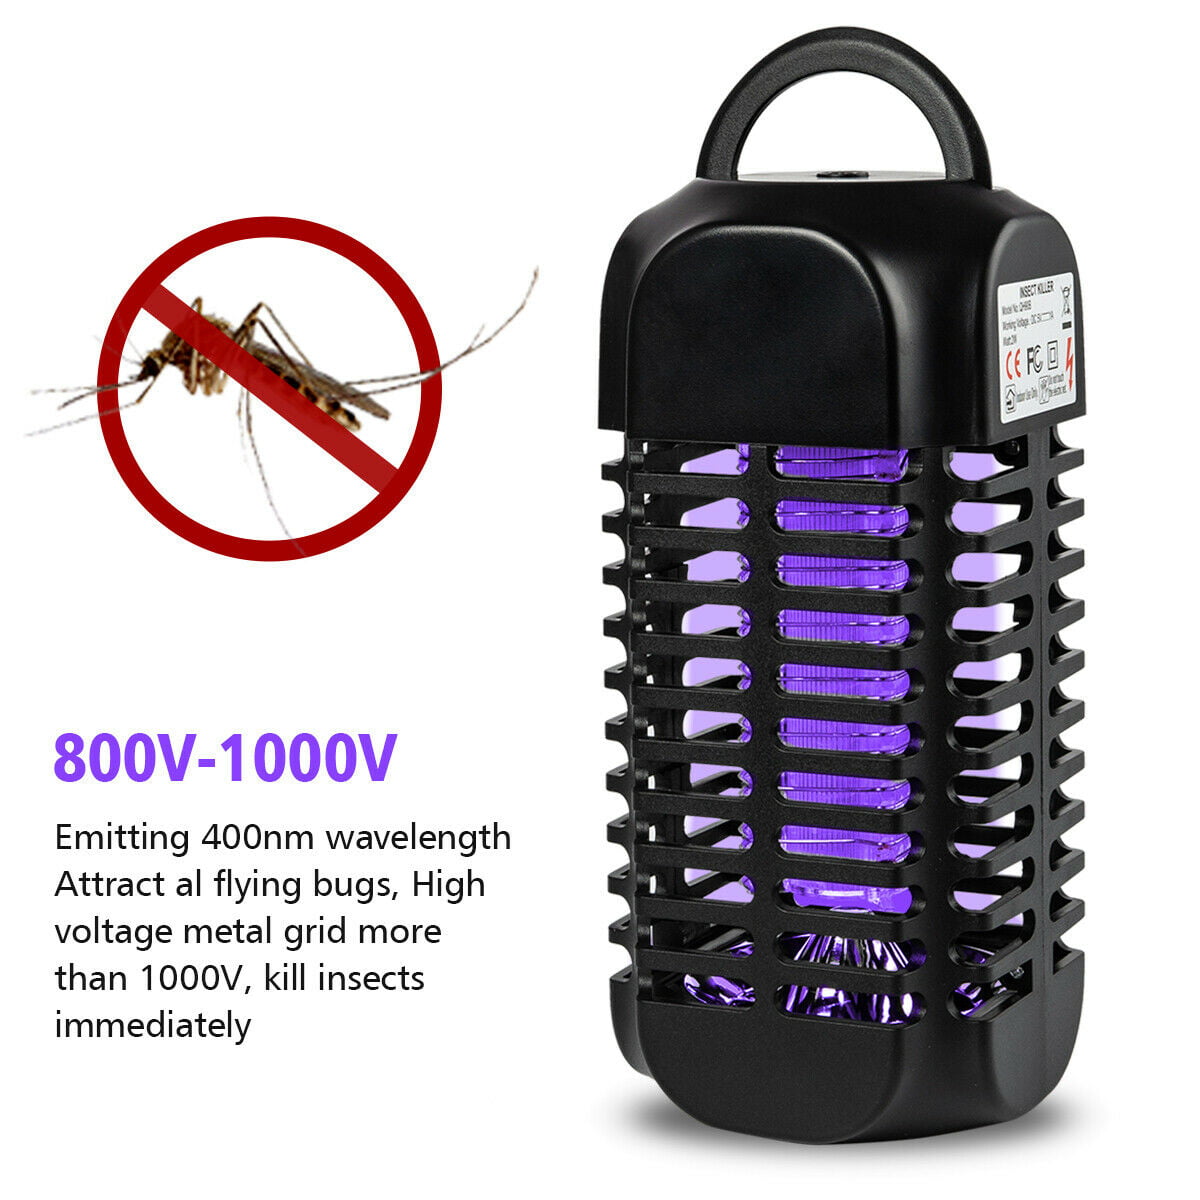 RYOMI SEIKATU Solar Bug Zapper Mosquito Killer with UV Light Insect Catcher Pest Control Indoor Outdoor 